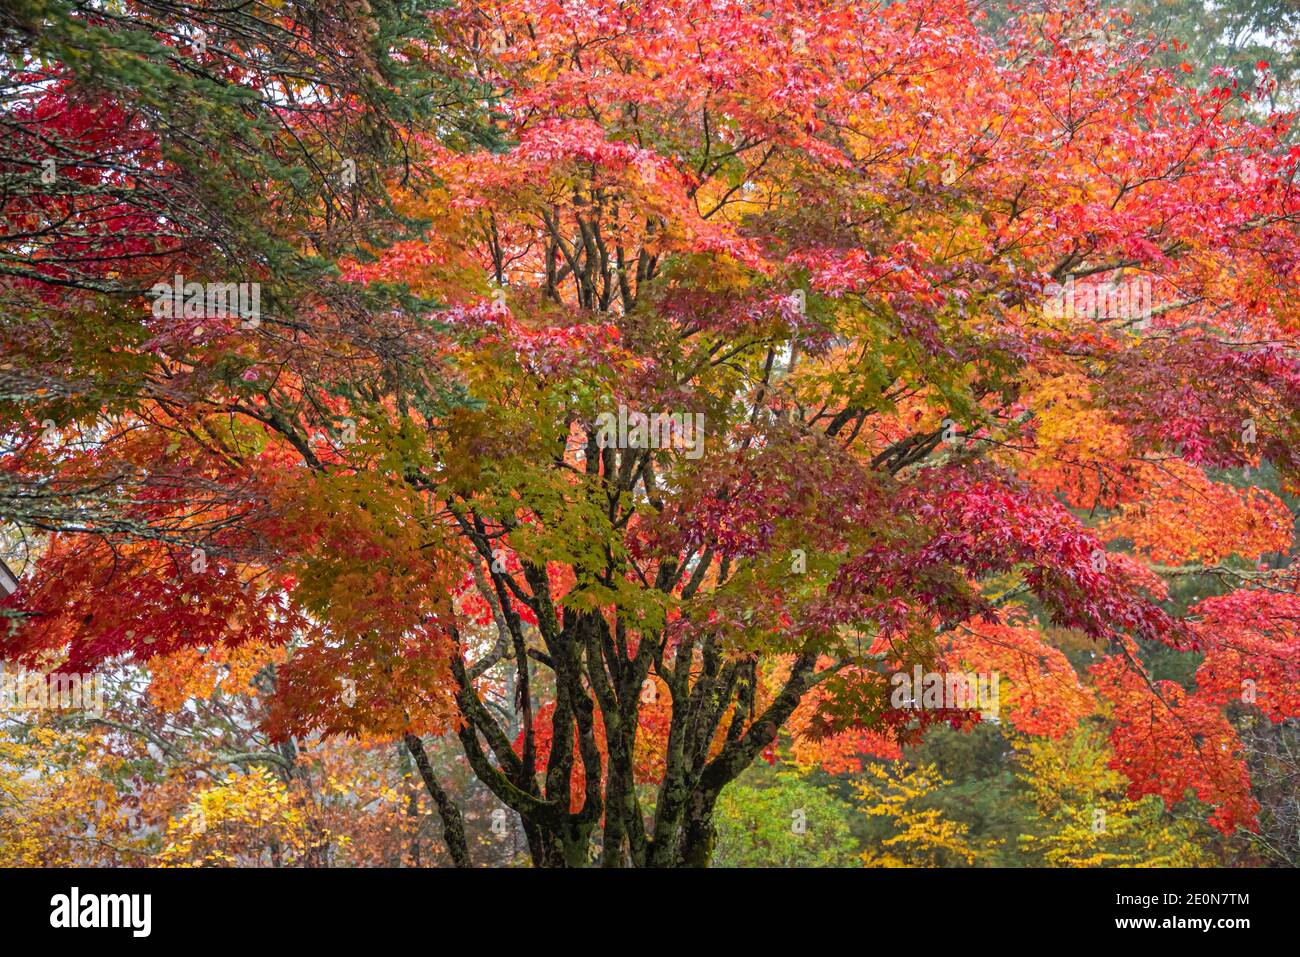 Colorful Japanese maple tree (Acer palmatum) with vibrant display of autumn leaves in Sapphire Valley near Cashiers, North Carolina. (USA) Stock Photo